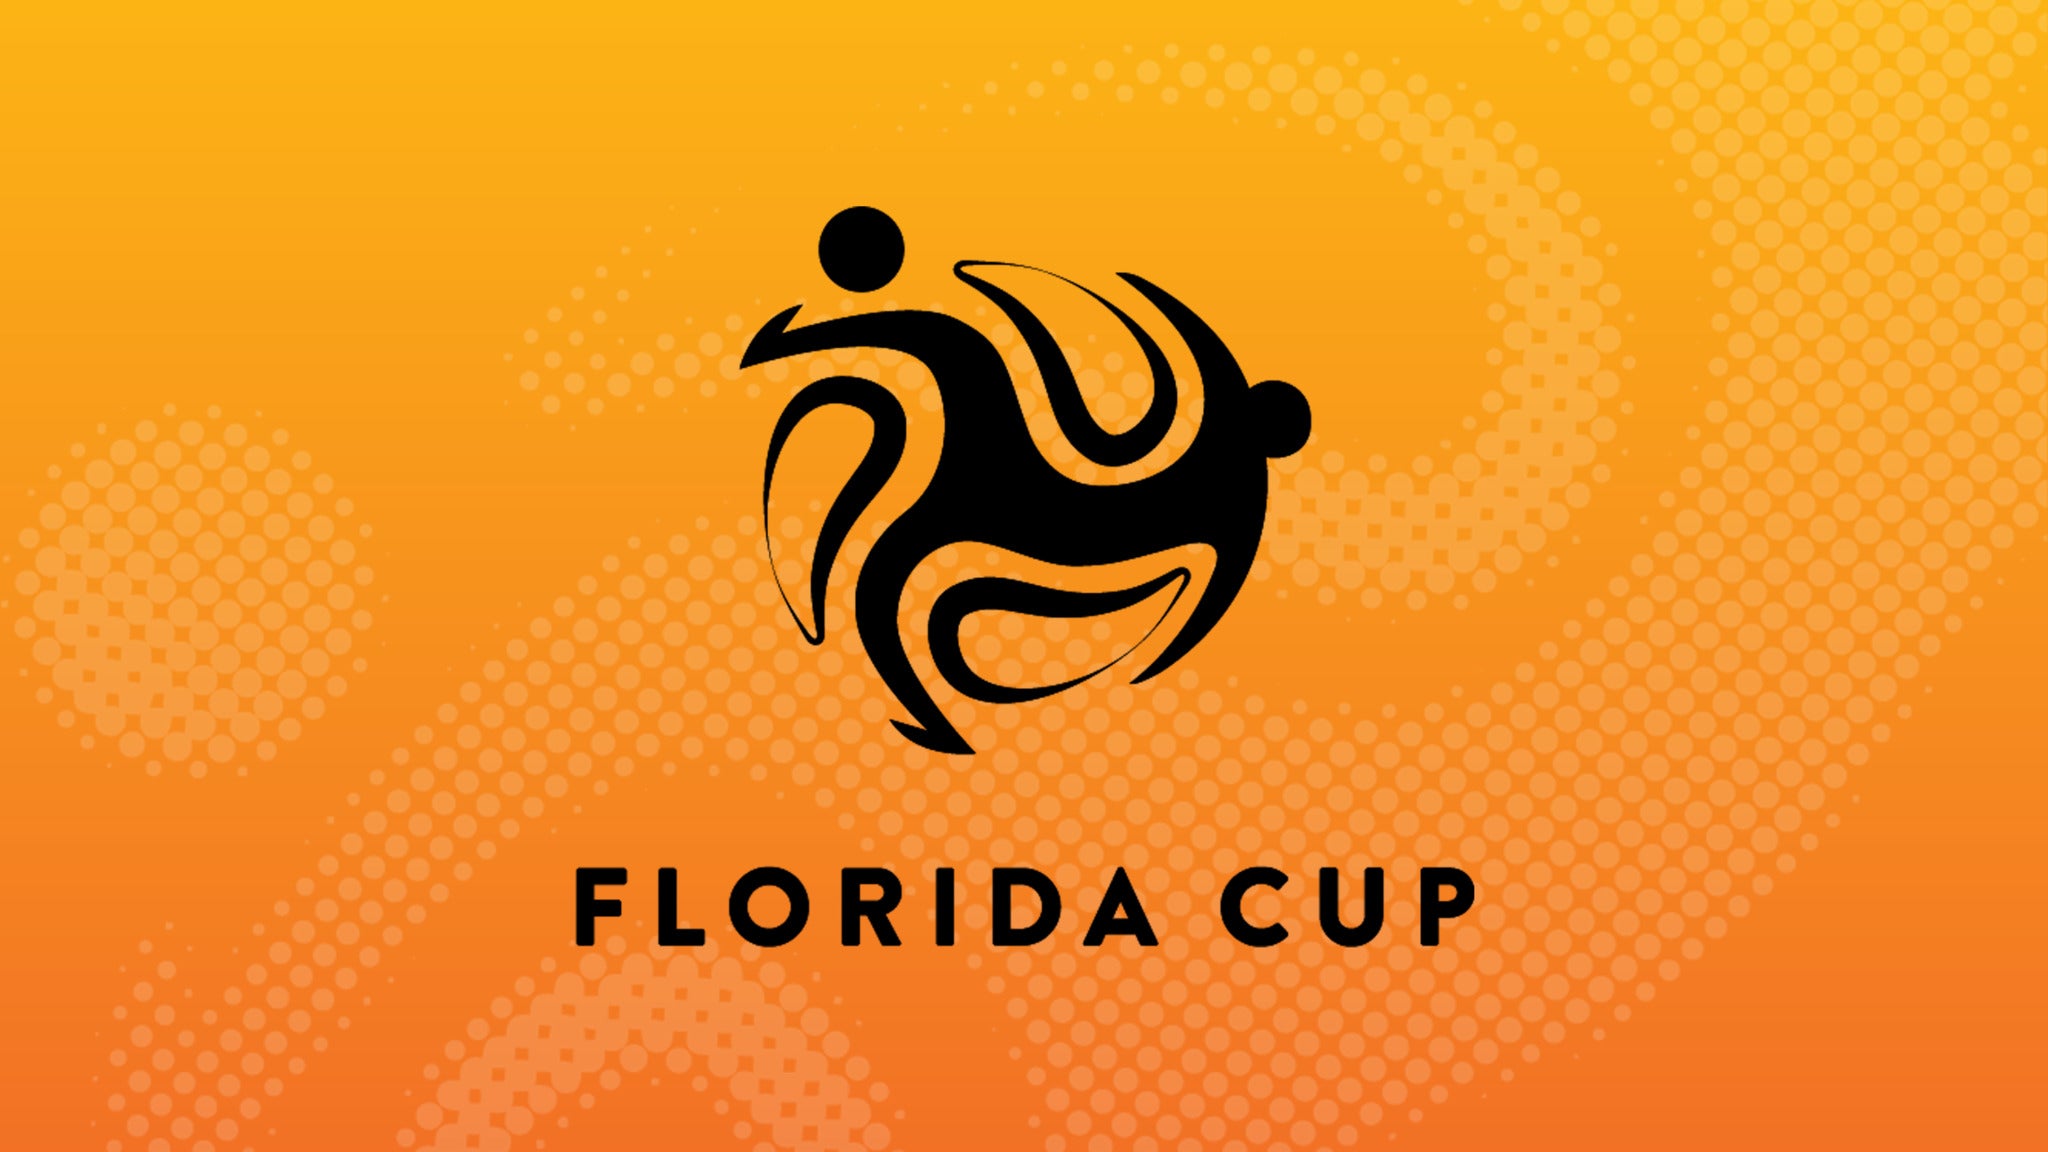 Florida Cup Semifinal Doubleheader in Orlando promo photo for Exclusive presale offer code